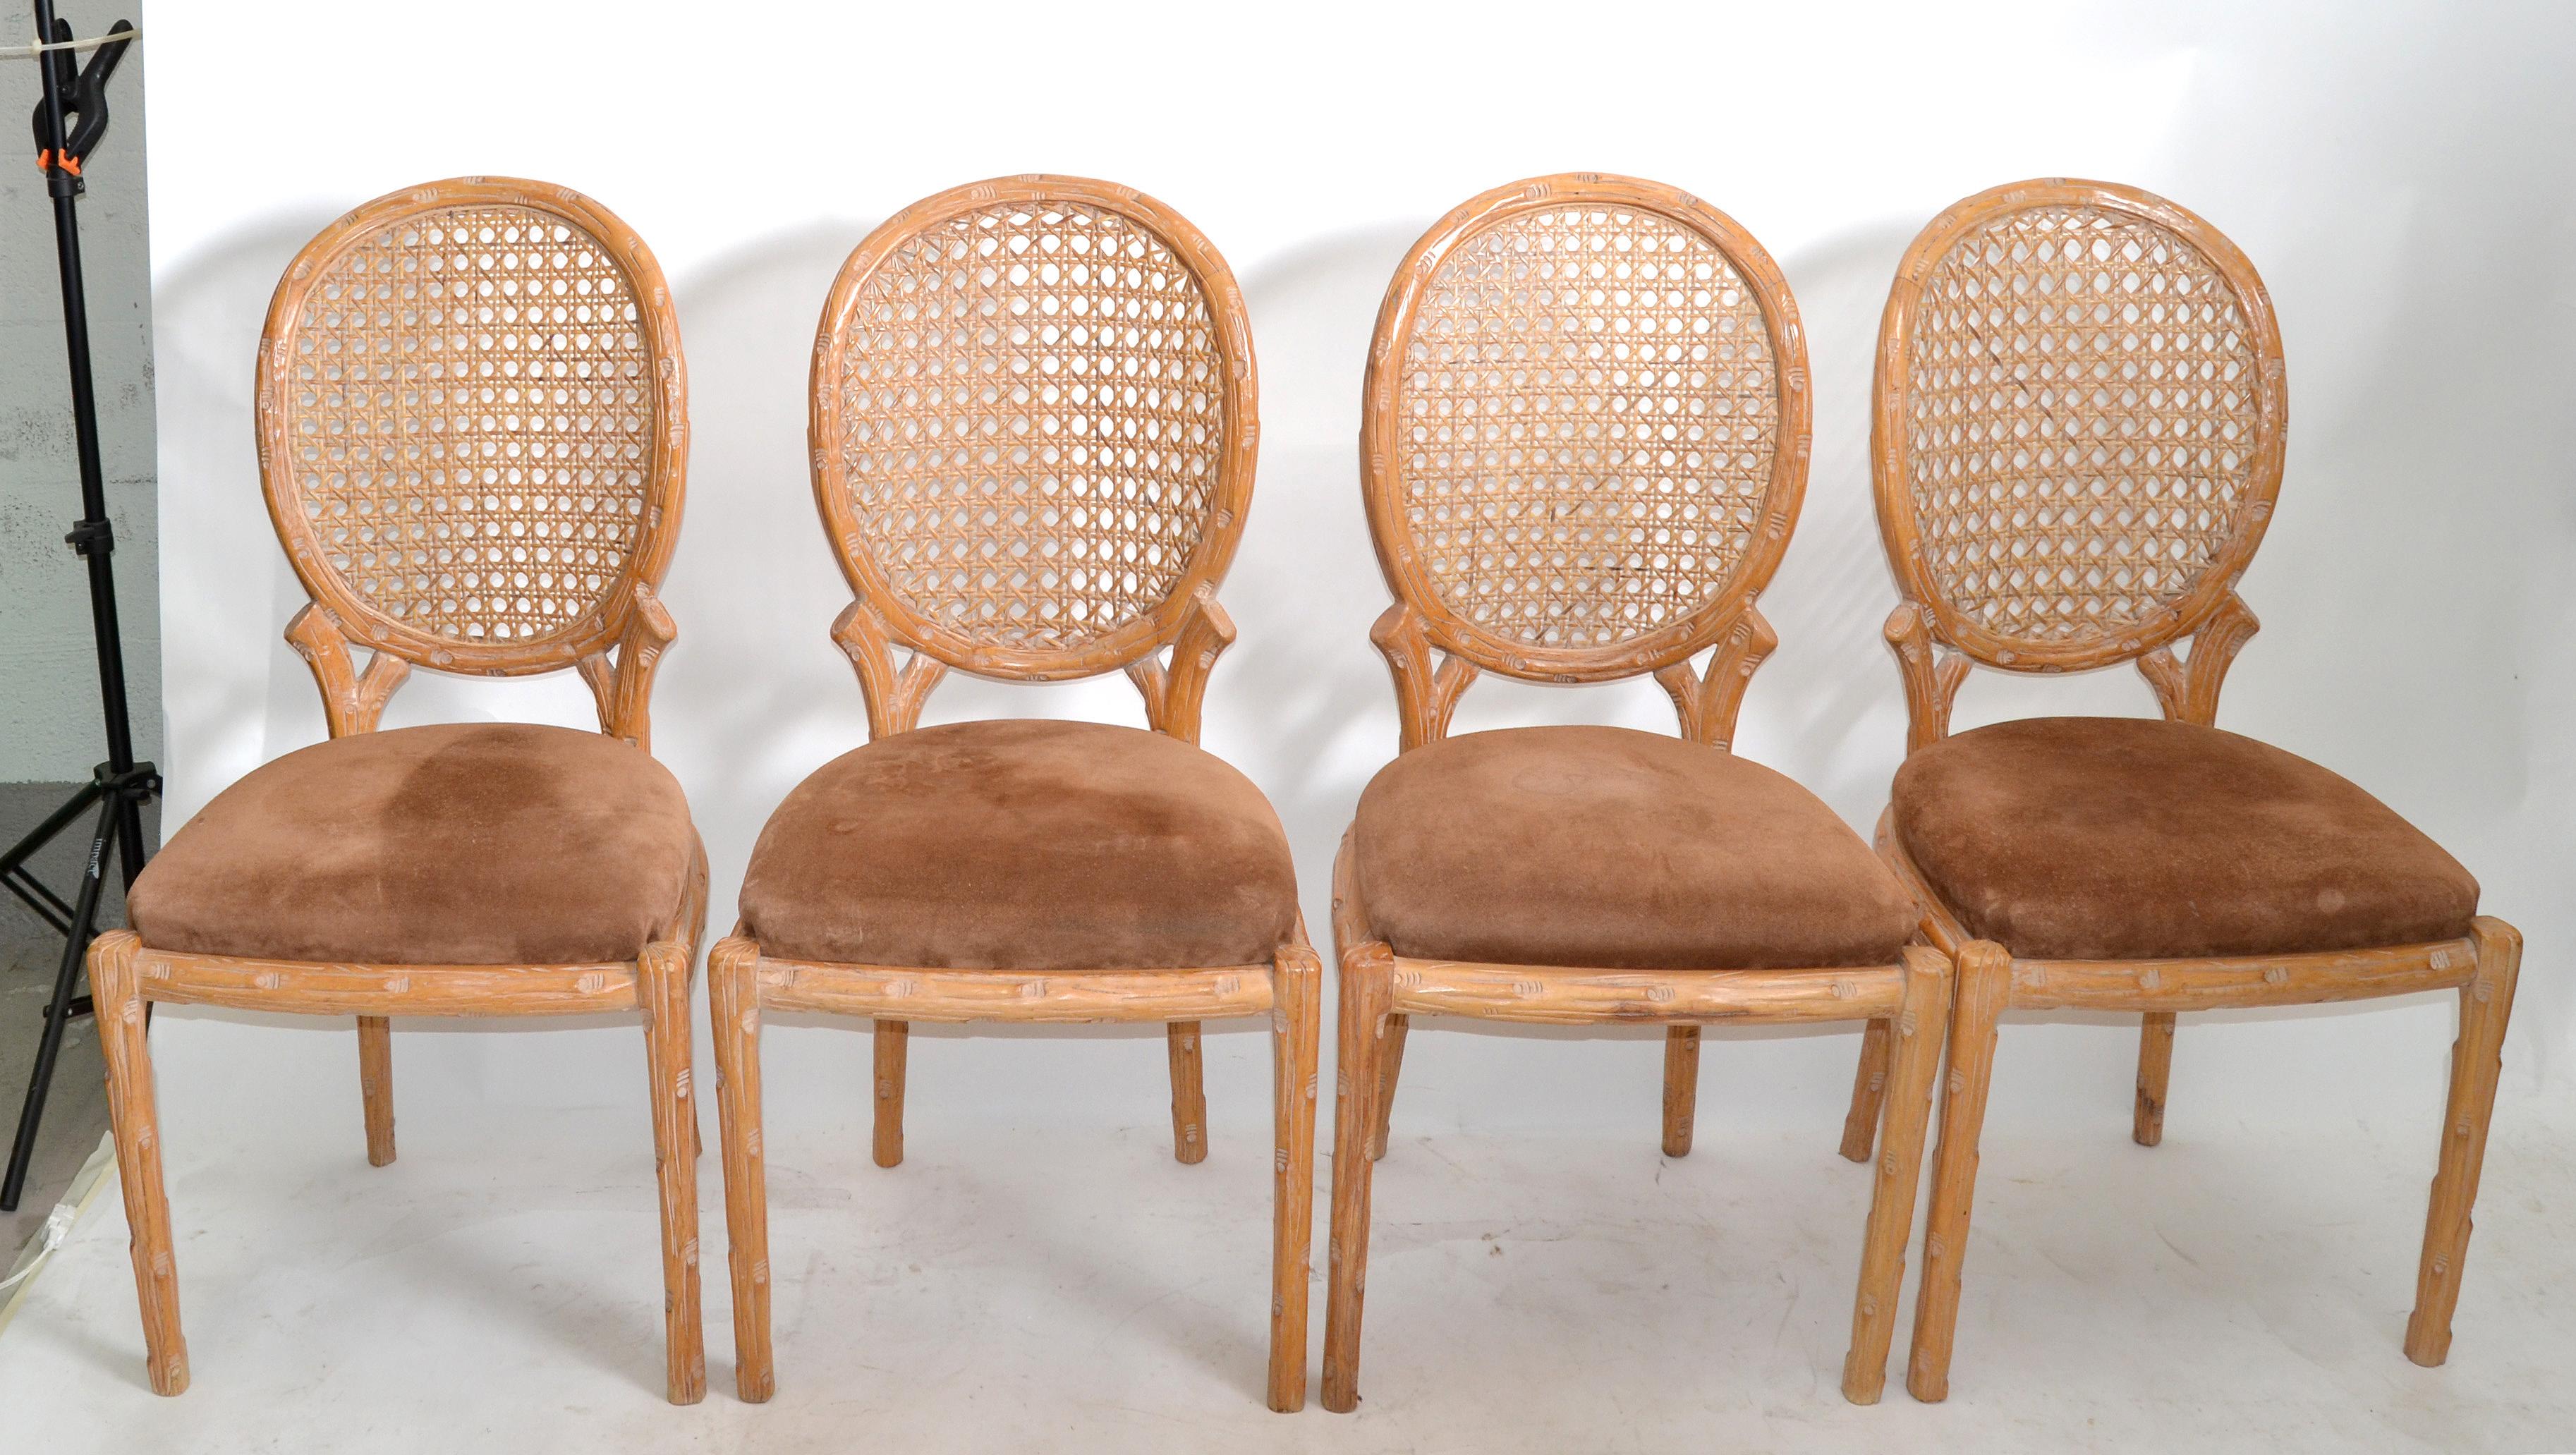 Set of 4 Italian dining or side chair by Fratelli Boffi, Milano made in the late 1970.
The chairs feature a hand-woven Cane Backrest, the hand-carved Wood Core and has still the original Ultrasuede brown seat upholstery.
All chairs have the